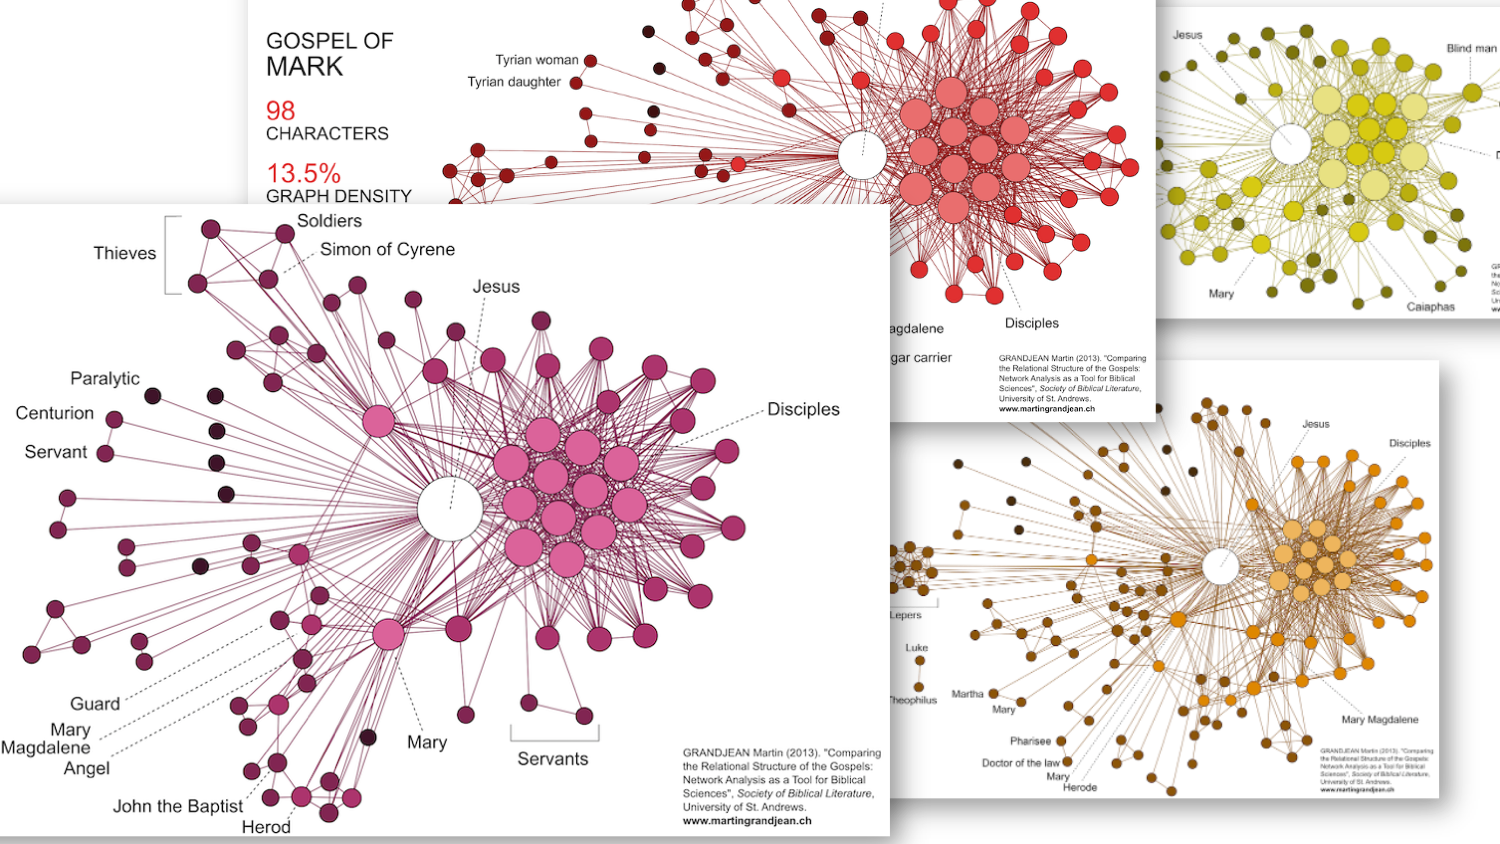 Data Visualization: Mapping the Character Network of the Four Gospels